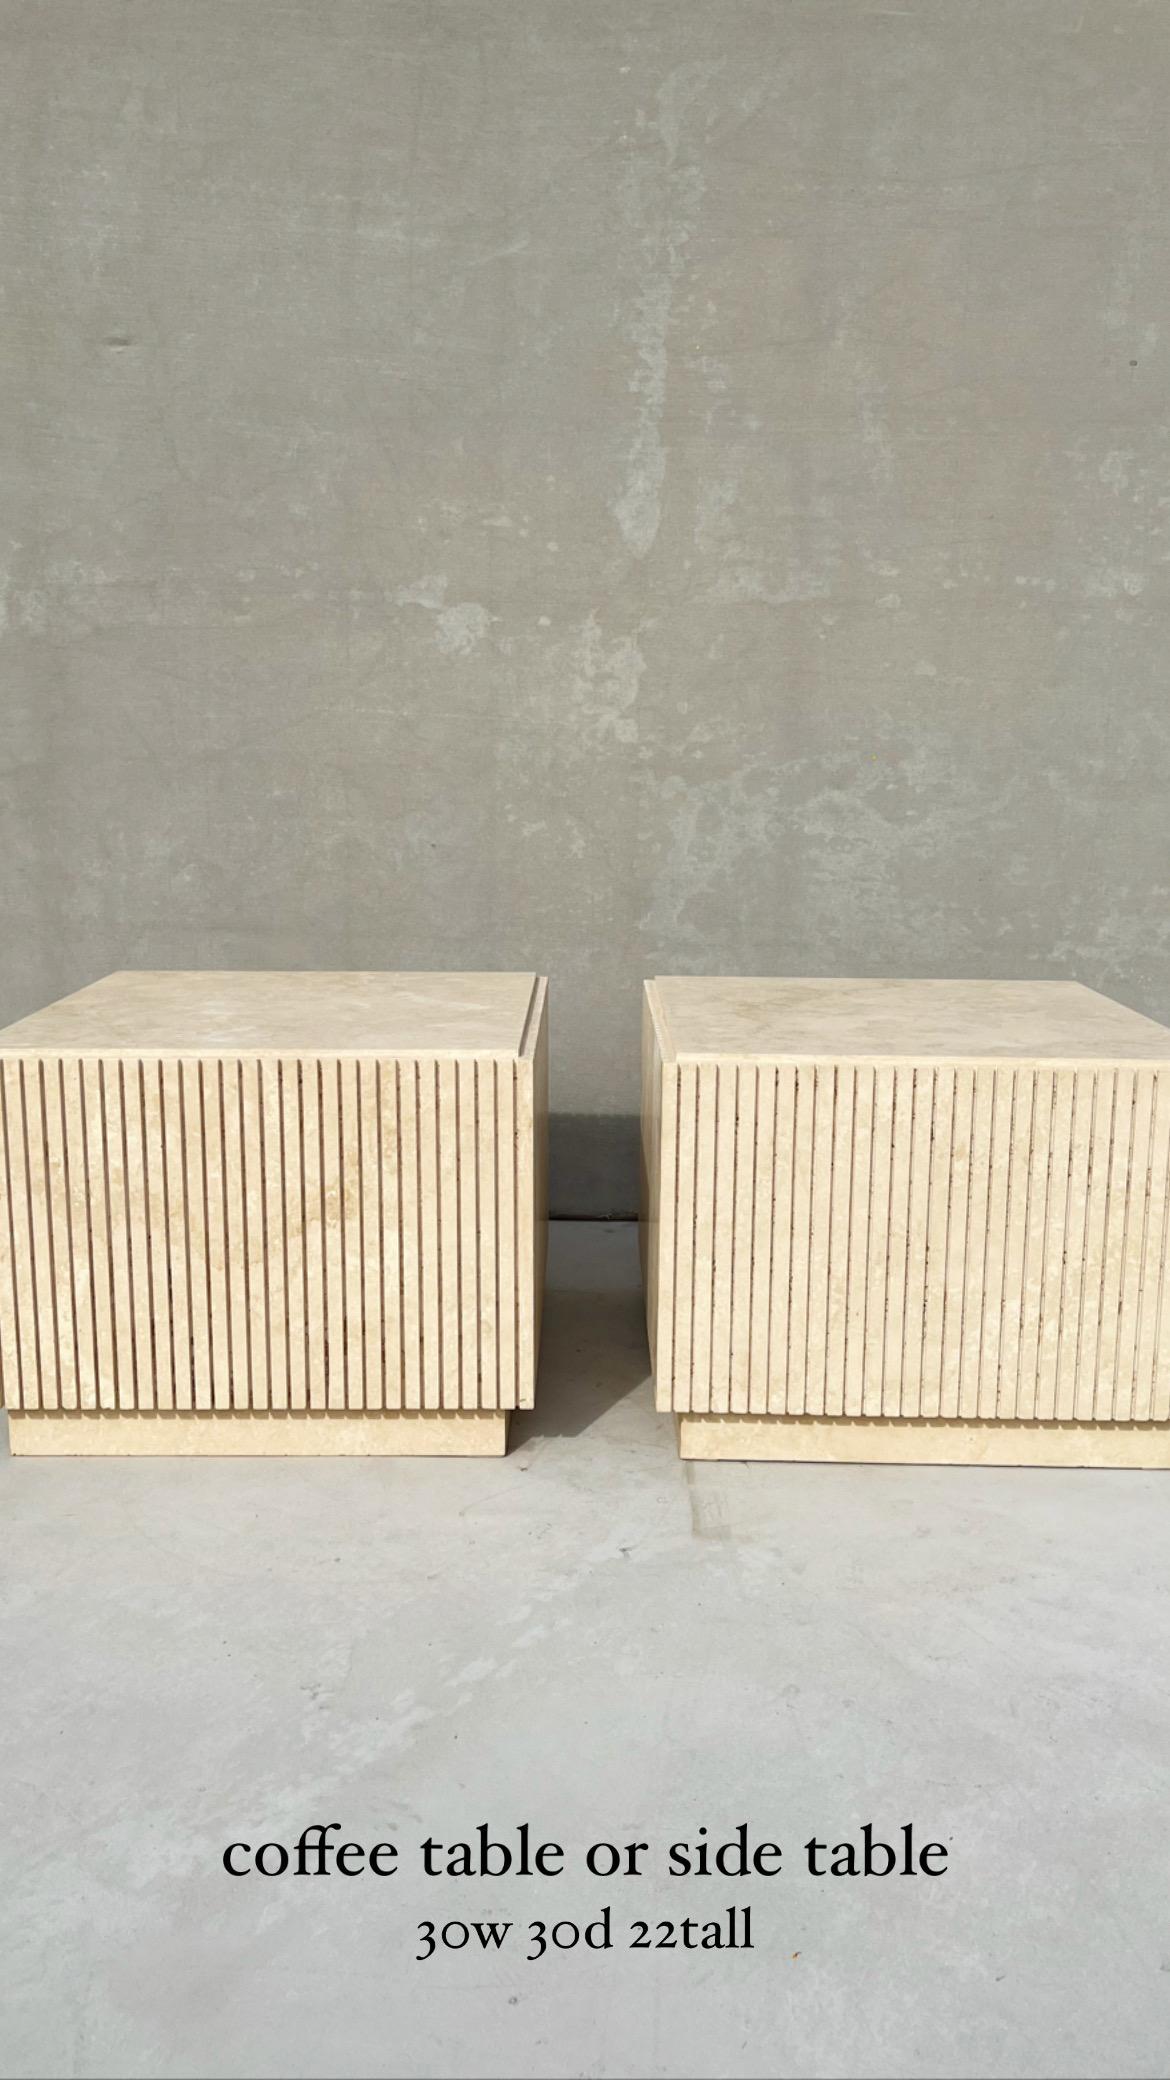 Vintage Italian Travertine Fluted Cube Side Tables - Set of 2

Extraordinary, one of a kind, custom made, vintage Italian fluted travertine cube tables 

The travertine, a work of naturally occurring art, is splashed with colors of pearly whites,